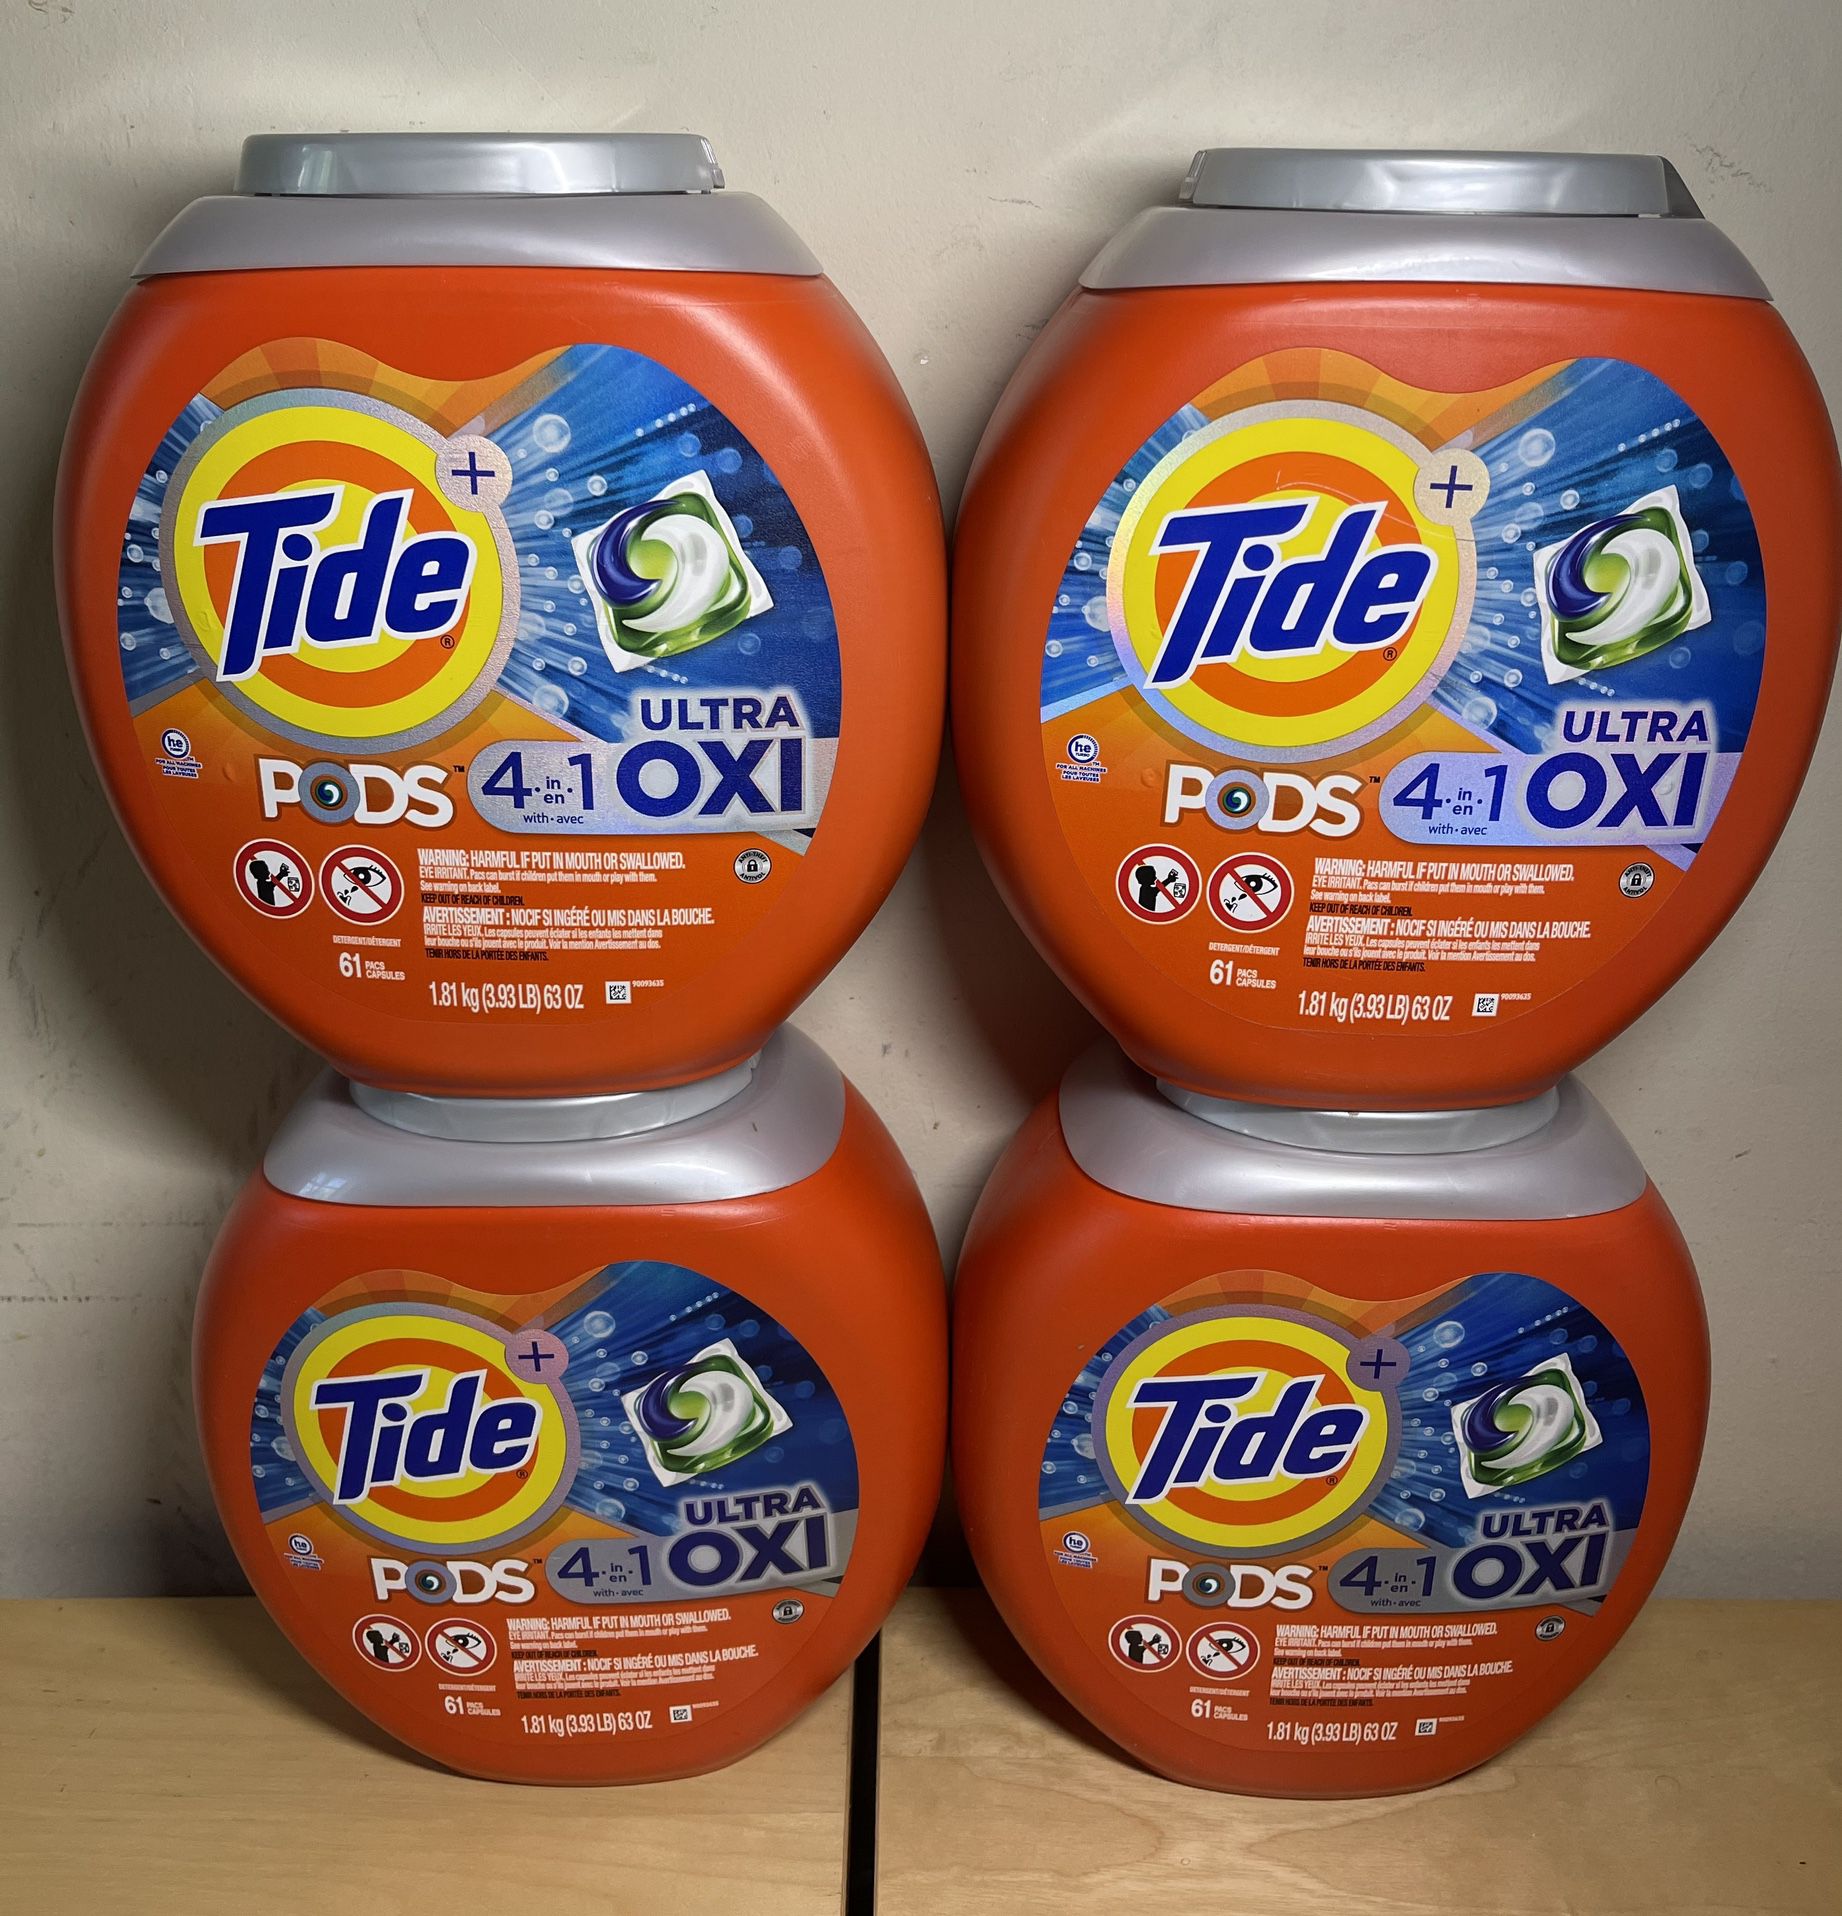 NEW Tide PODS Ultra Oxi Laundry Detergent Soap Pacs, 61 Count, 4 in 1 Laundry Pods